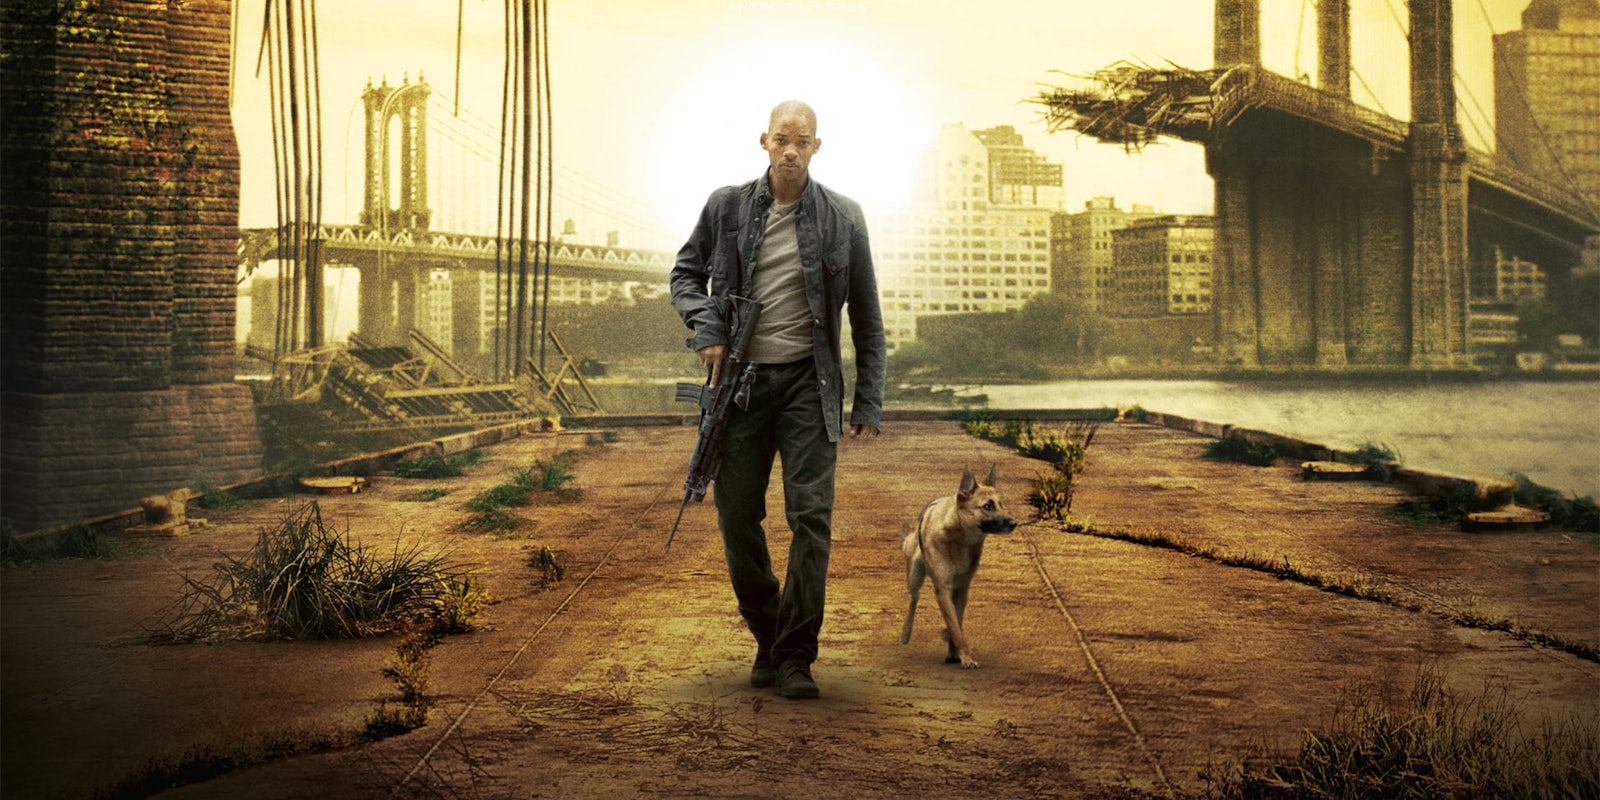 will smith walking with rifle and dog in bombed out city